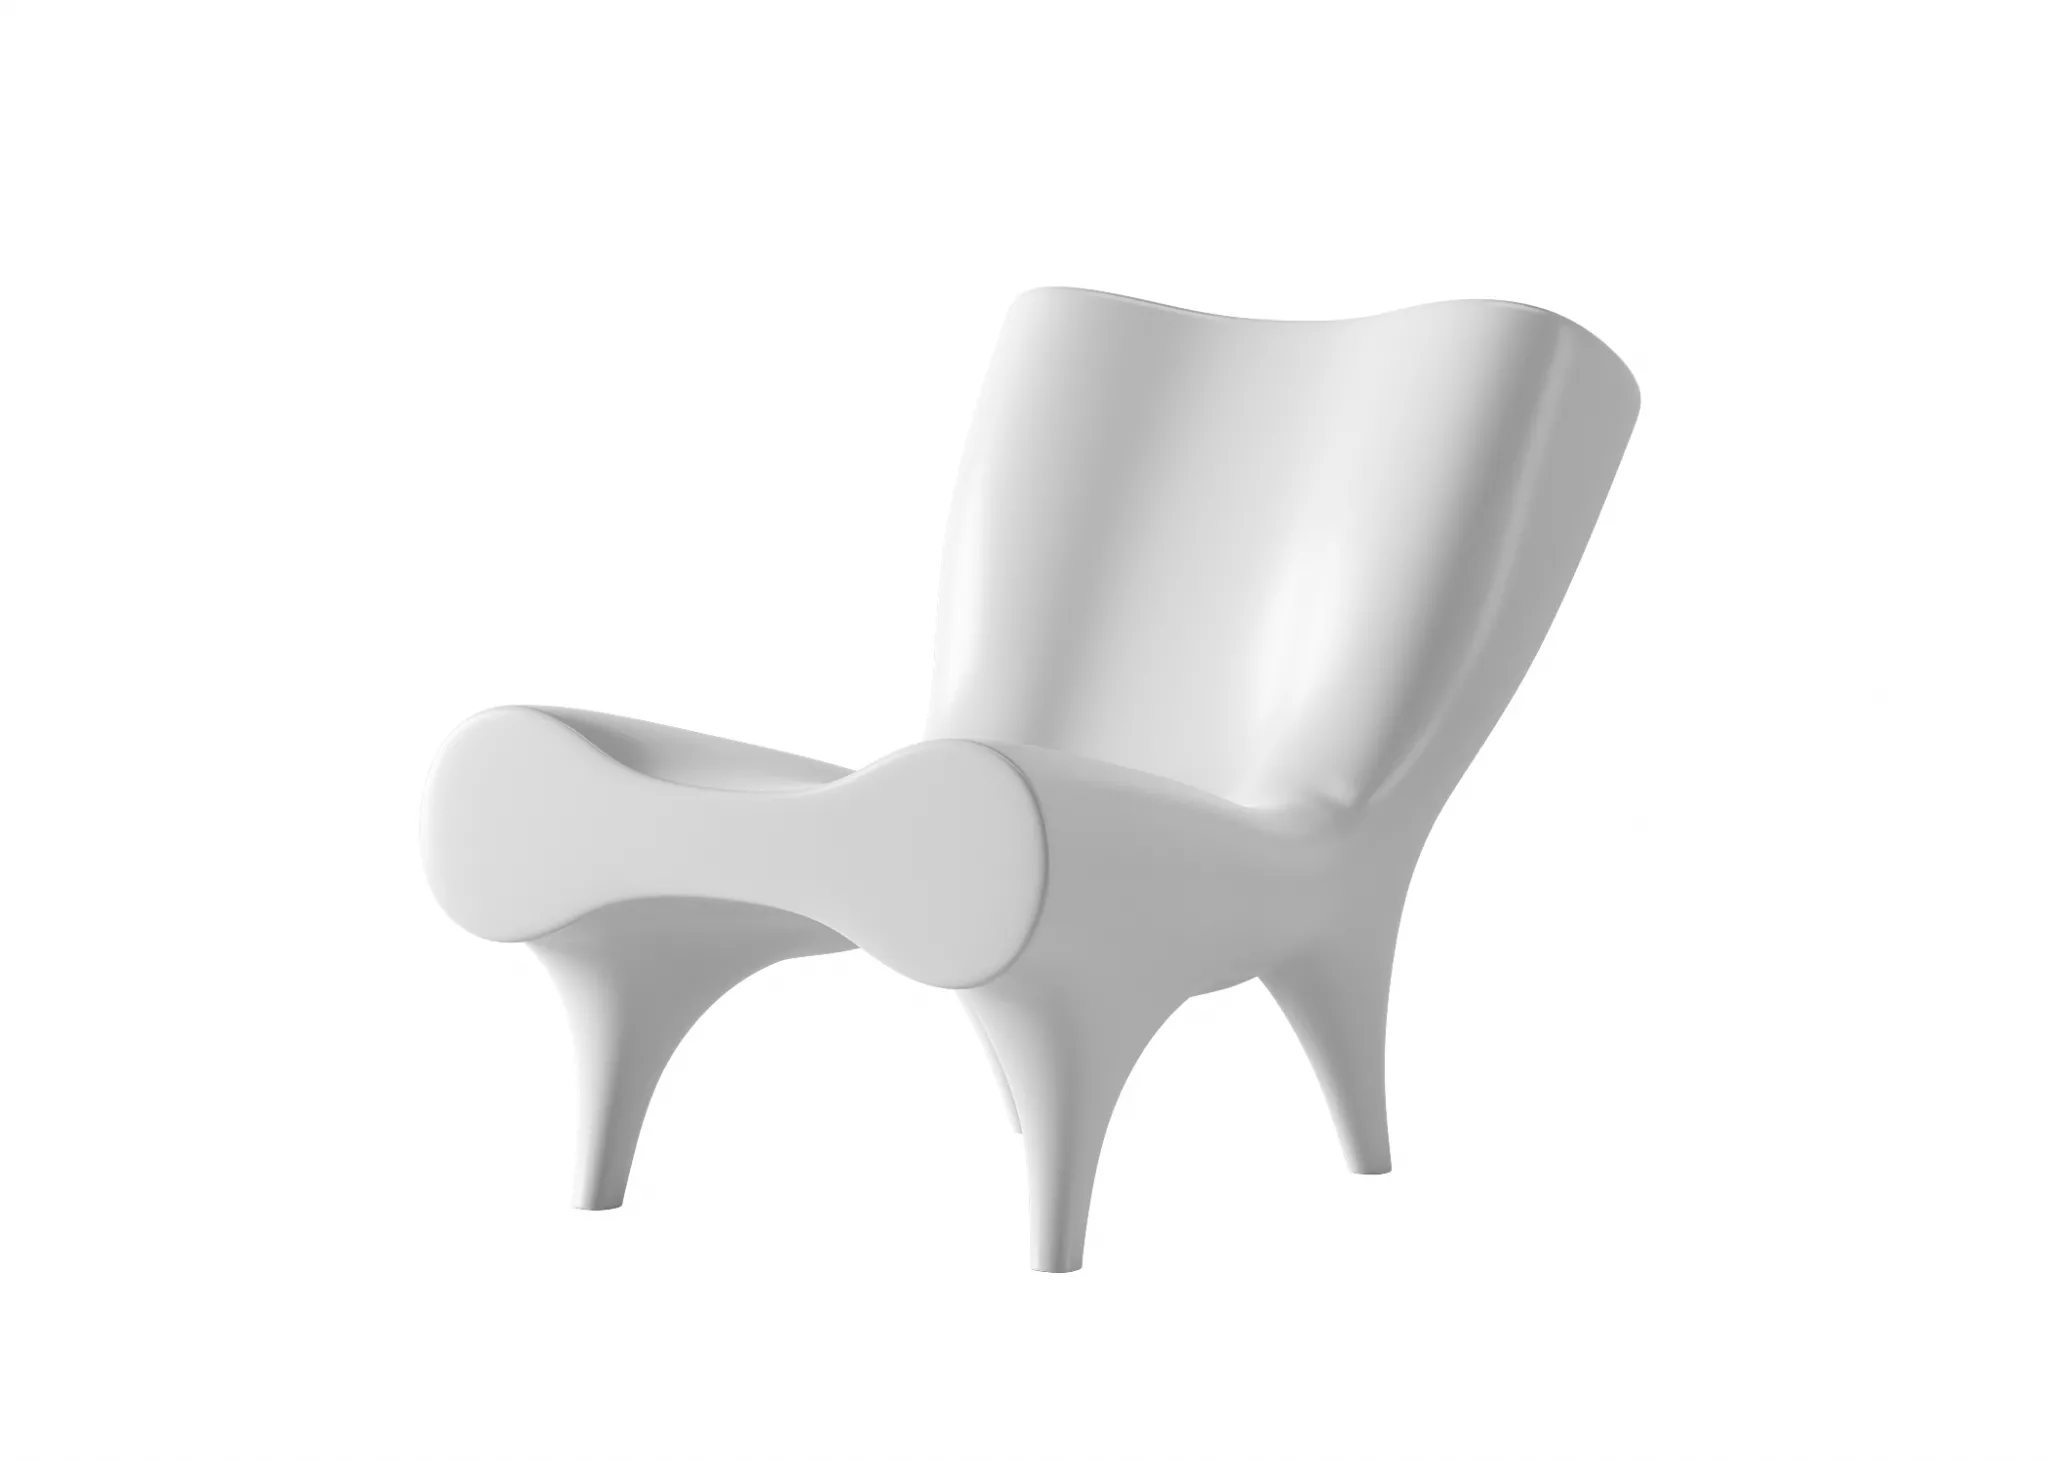 FURNITURE 3D MODELS – CHAIRS – 0150